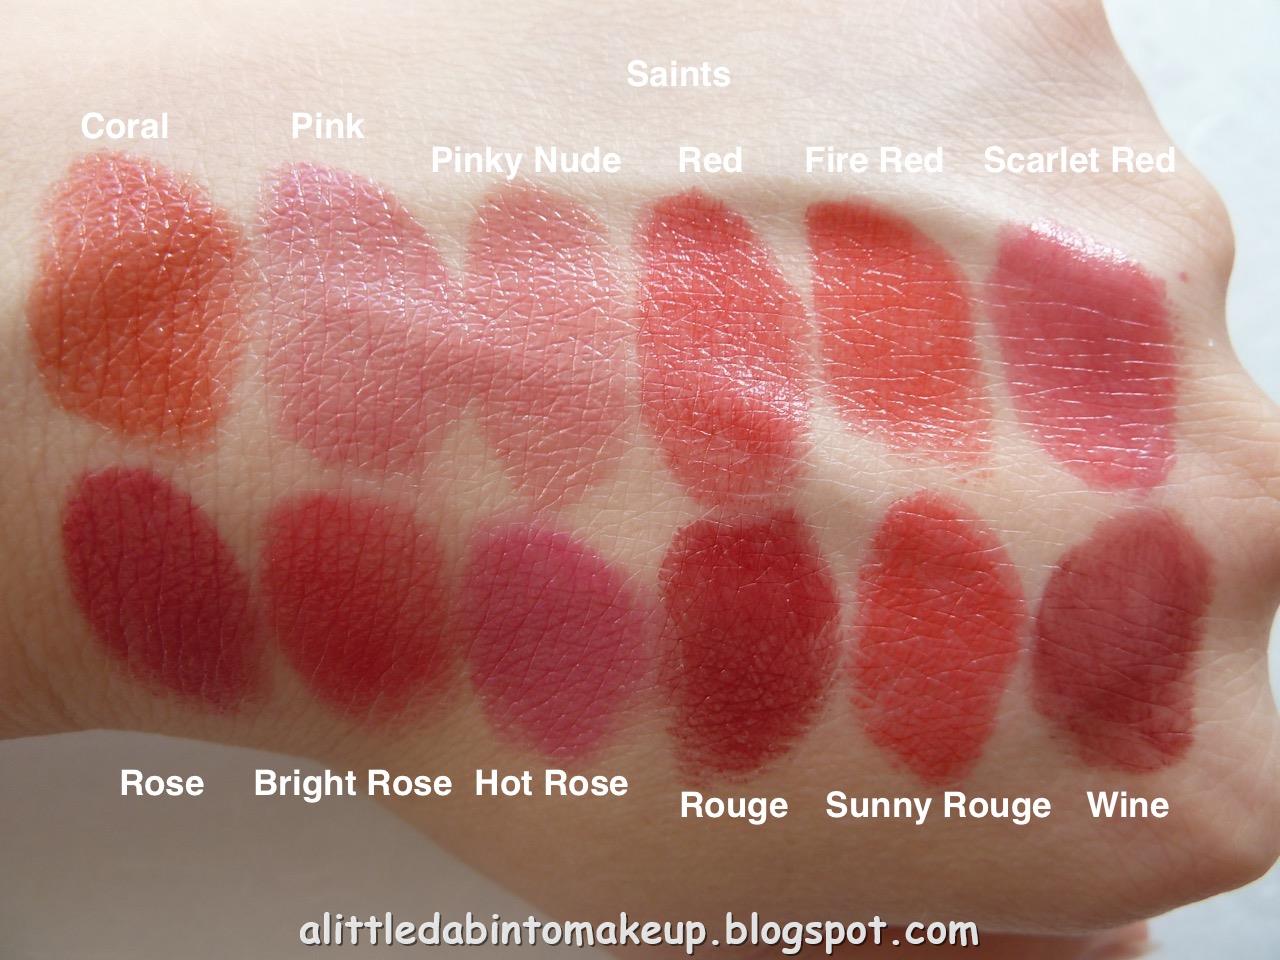 Of Toys and Co: Lipstick Queen Lipsticks Comparison Swatches